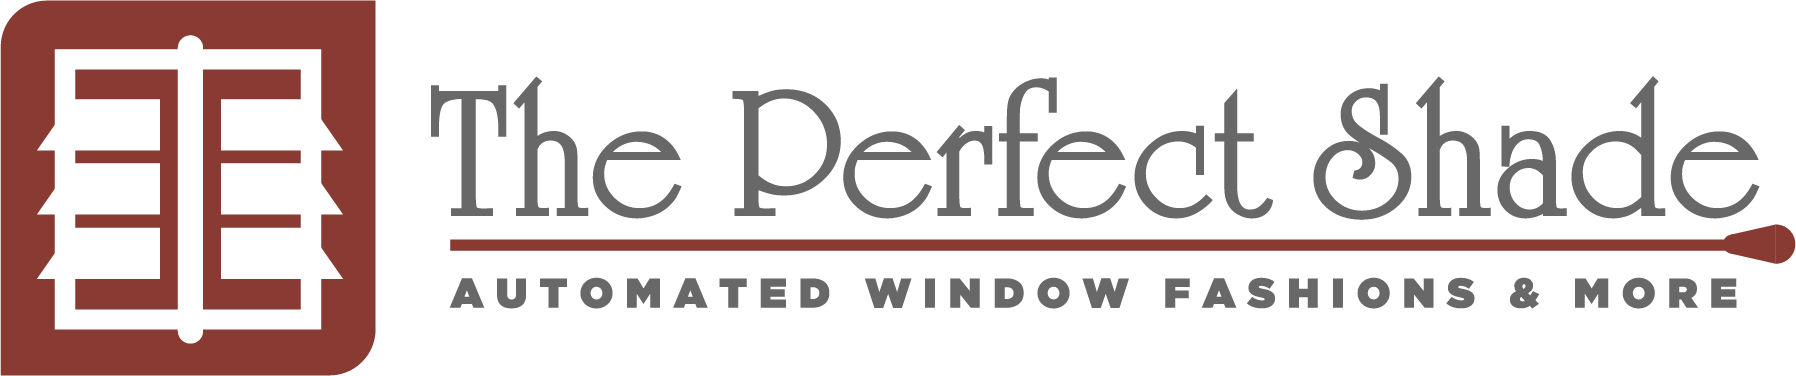 Logo for The Perfect Shade Automated Window Fashions & More in San Antonio, Texas (TX)